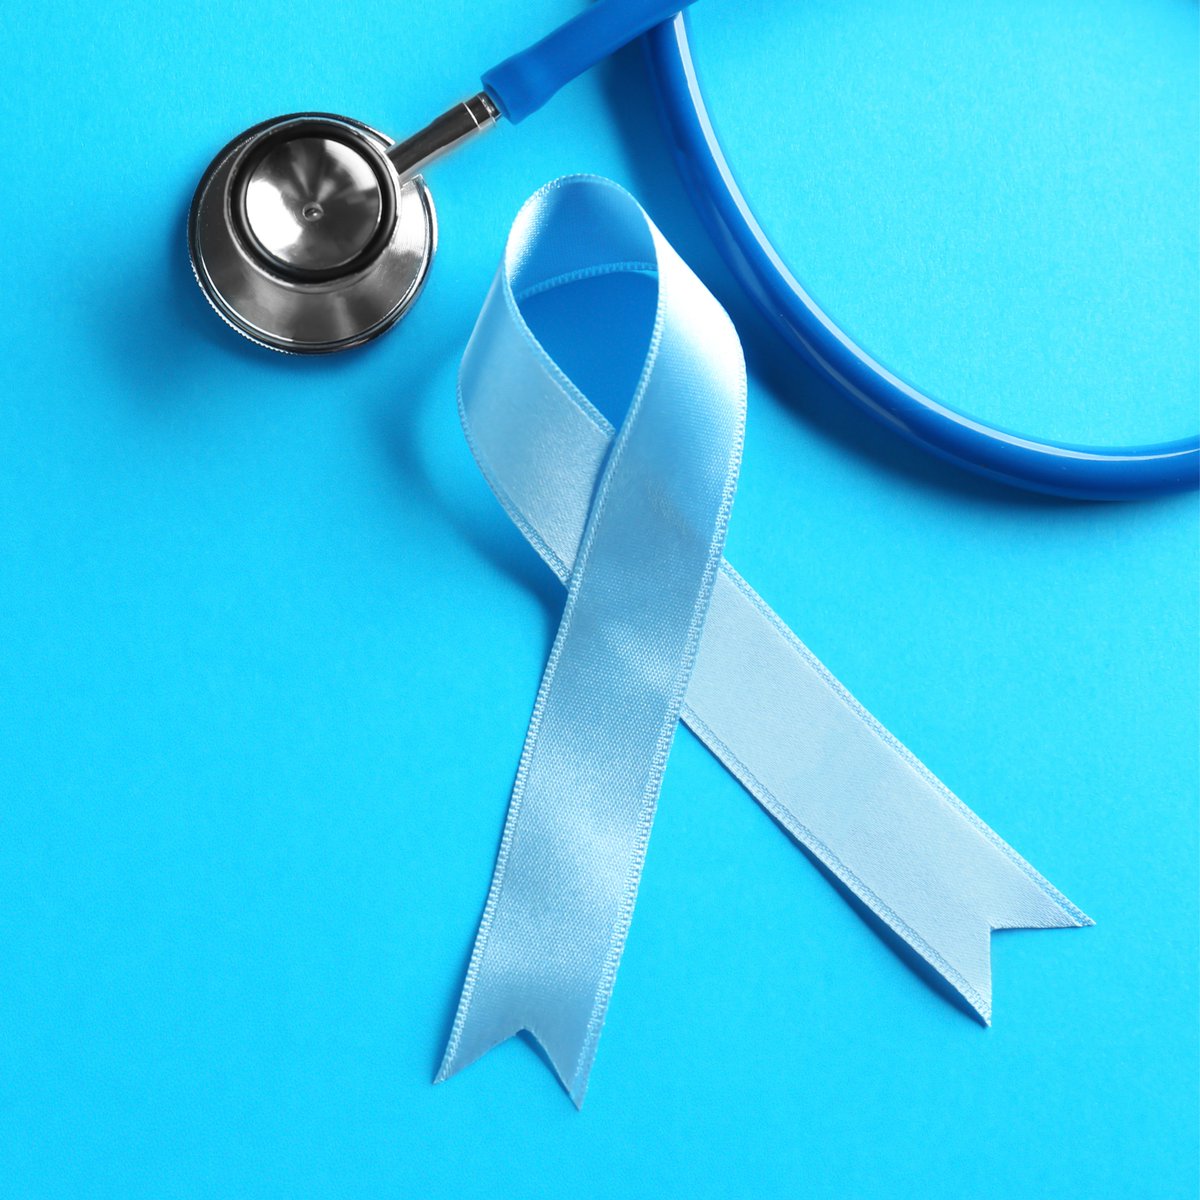 Wear your blue ribbon with pride and be part of a community that's making a real difference. Together, we can beat bowel cancer—one screening at a time.

Read more 👇
budandtender.com/blog

#BowelCancerAwareness #GetScreened #HealthyLiving #FightCancer #BlueRibbon